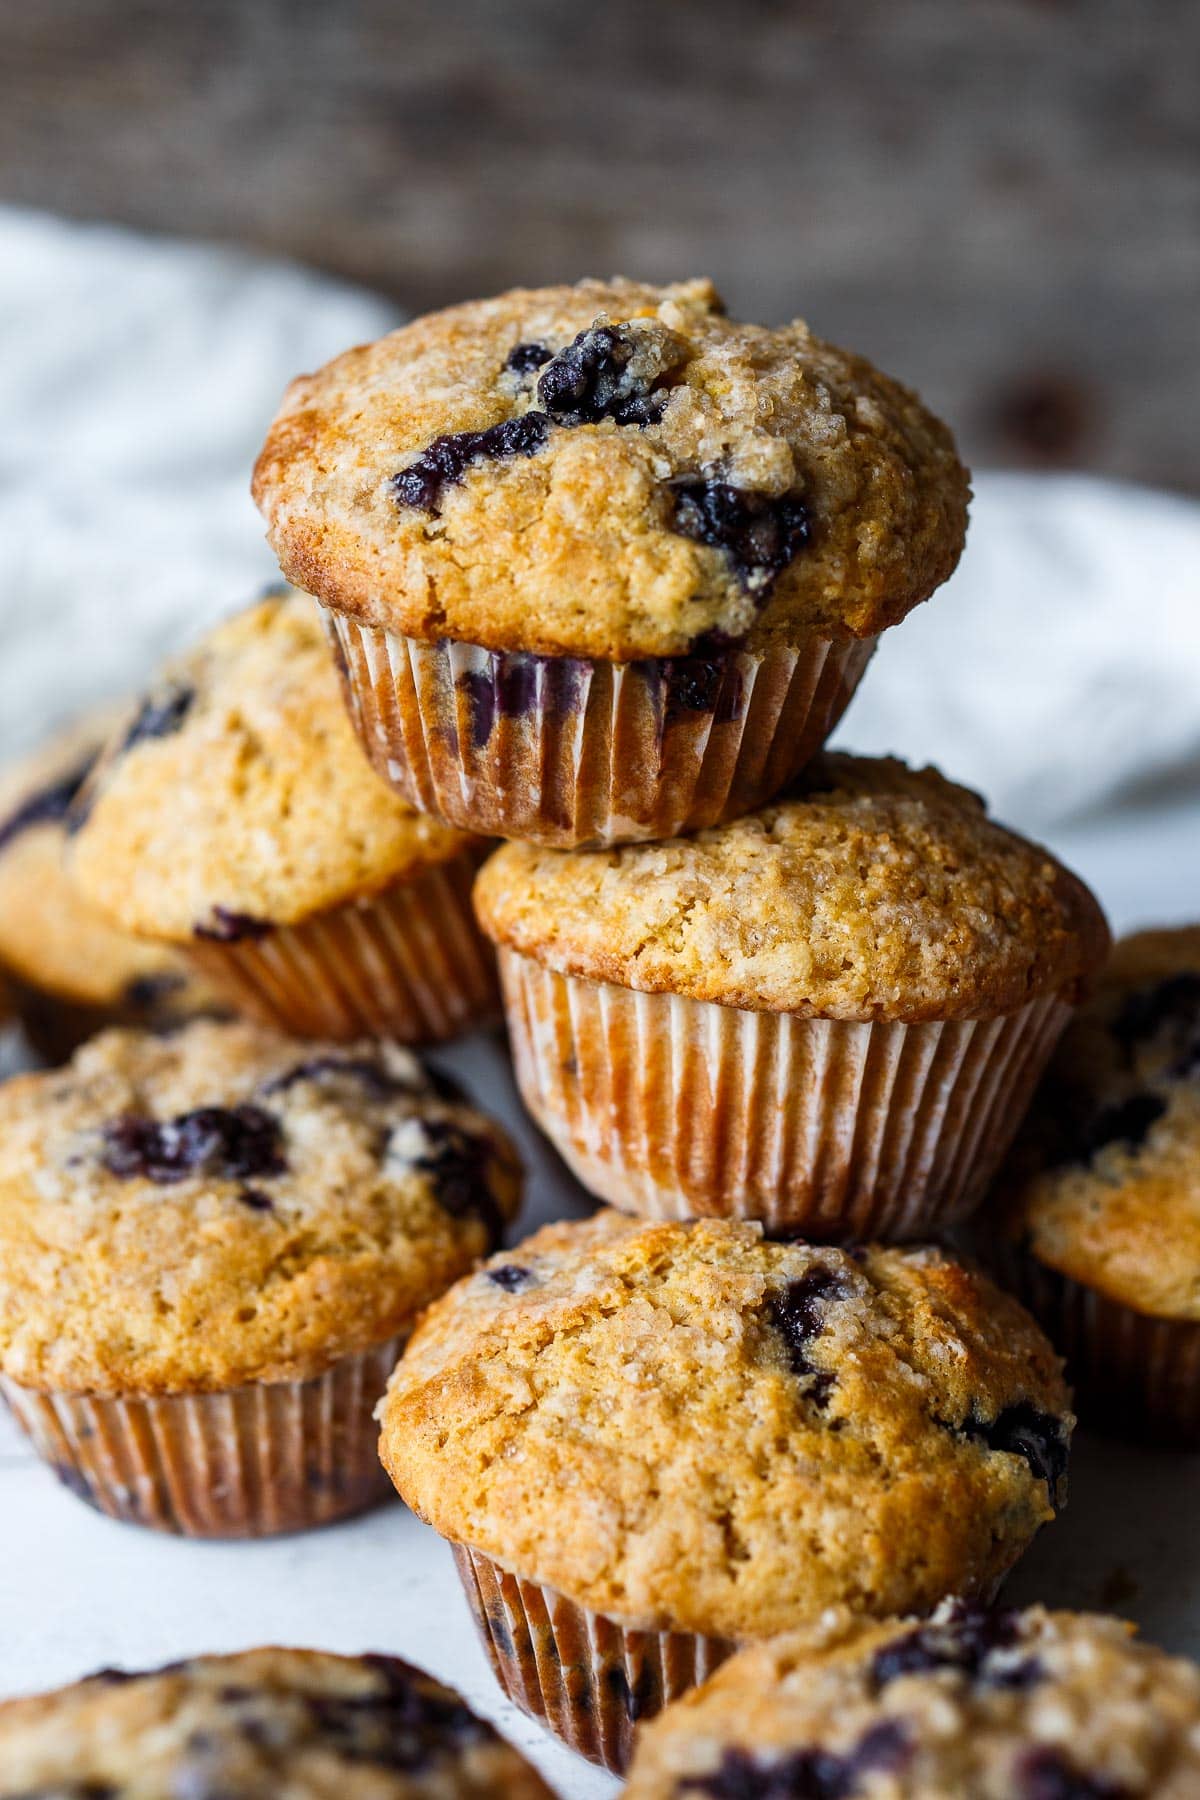 Tender blueberry muffins with lemon zest, vanilla and cardamom, lightly sweetened and made with fresh or frozen blueberries.  Gluten free customizable.  A delicious breakfast or an afternoon snack.  Gluten free customizable.